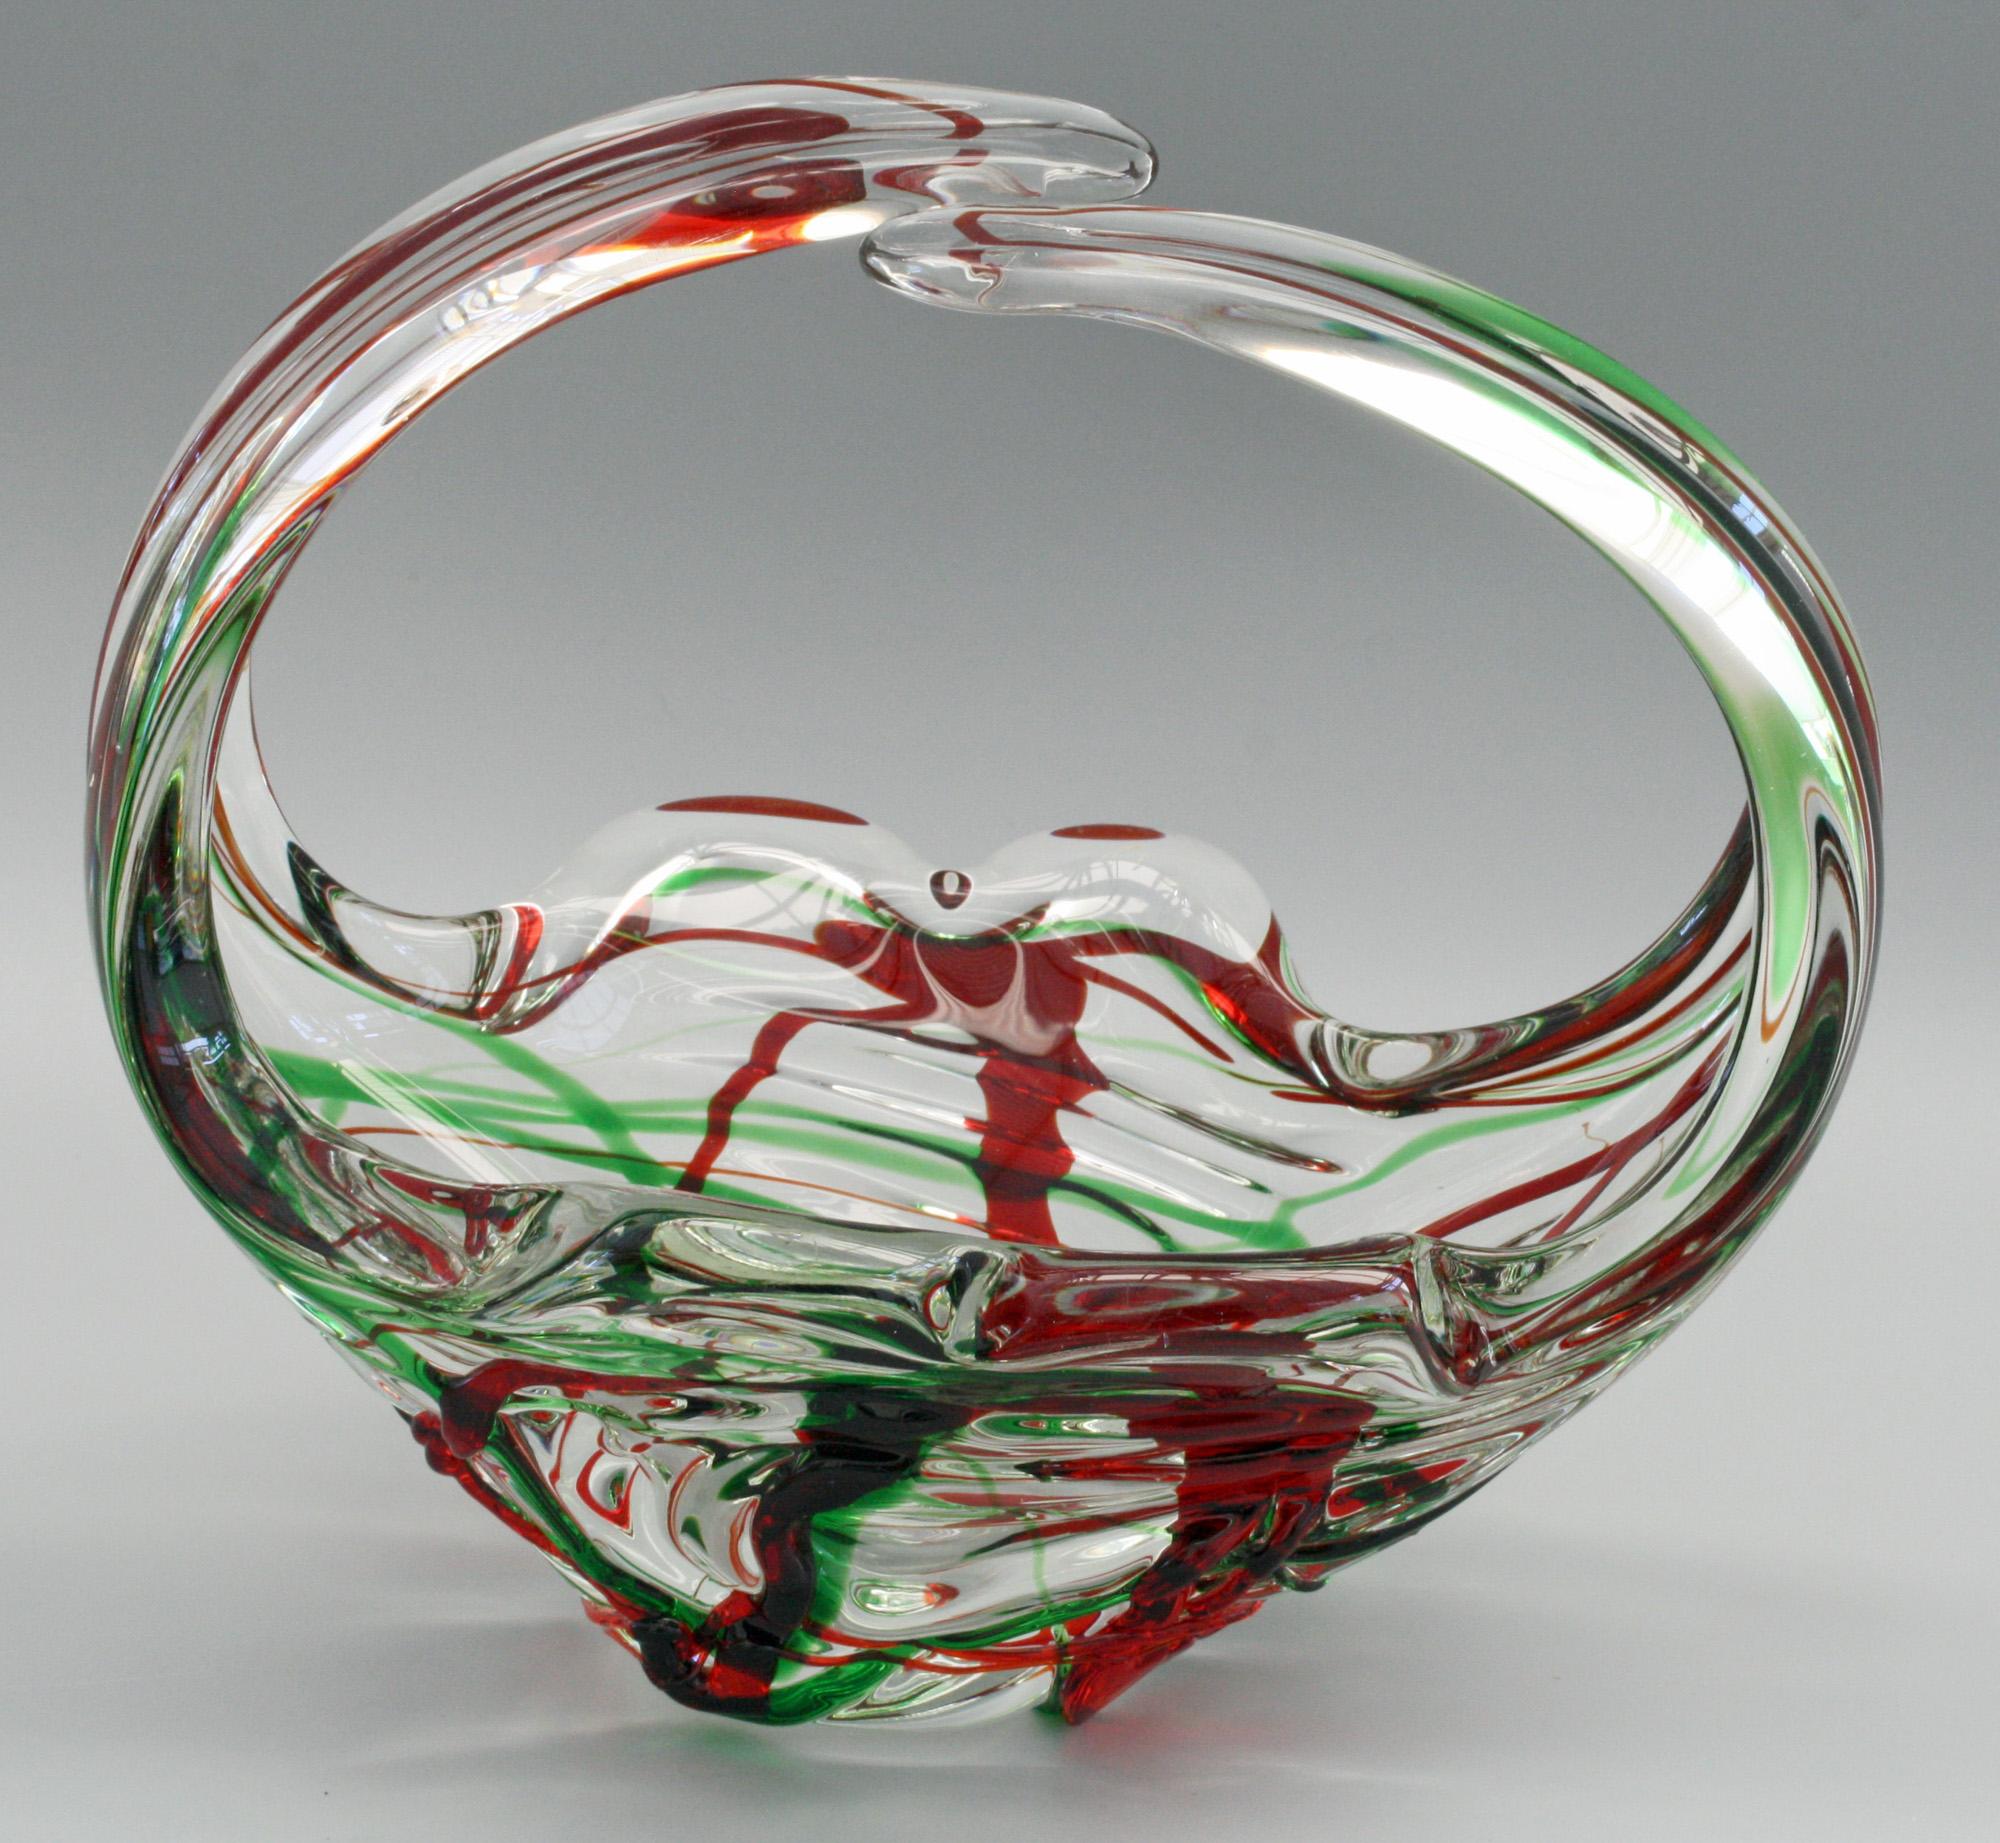 Murano Italian Midcentury Art Glass Bowl with Red and Green Trailed Designs For Sale 10